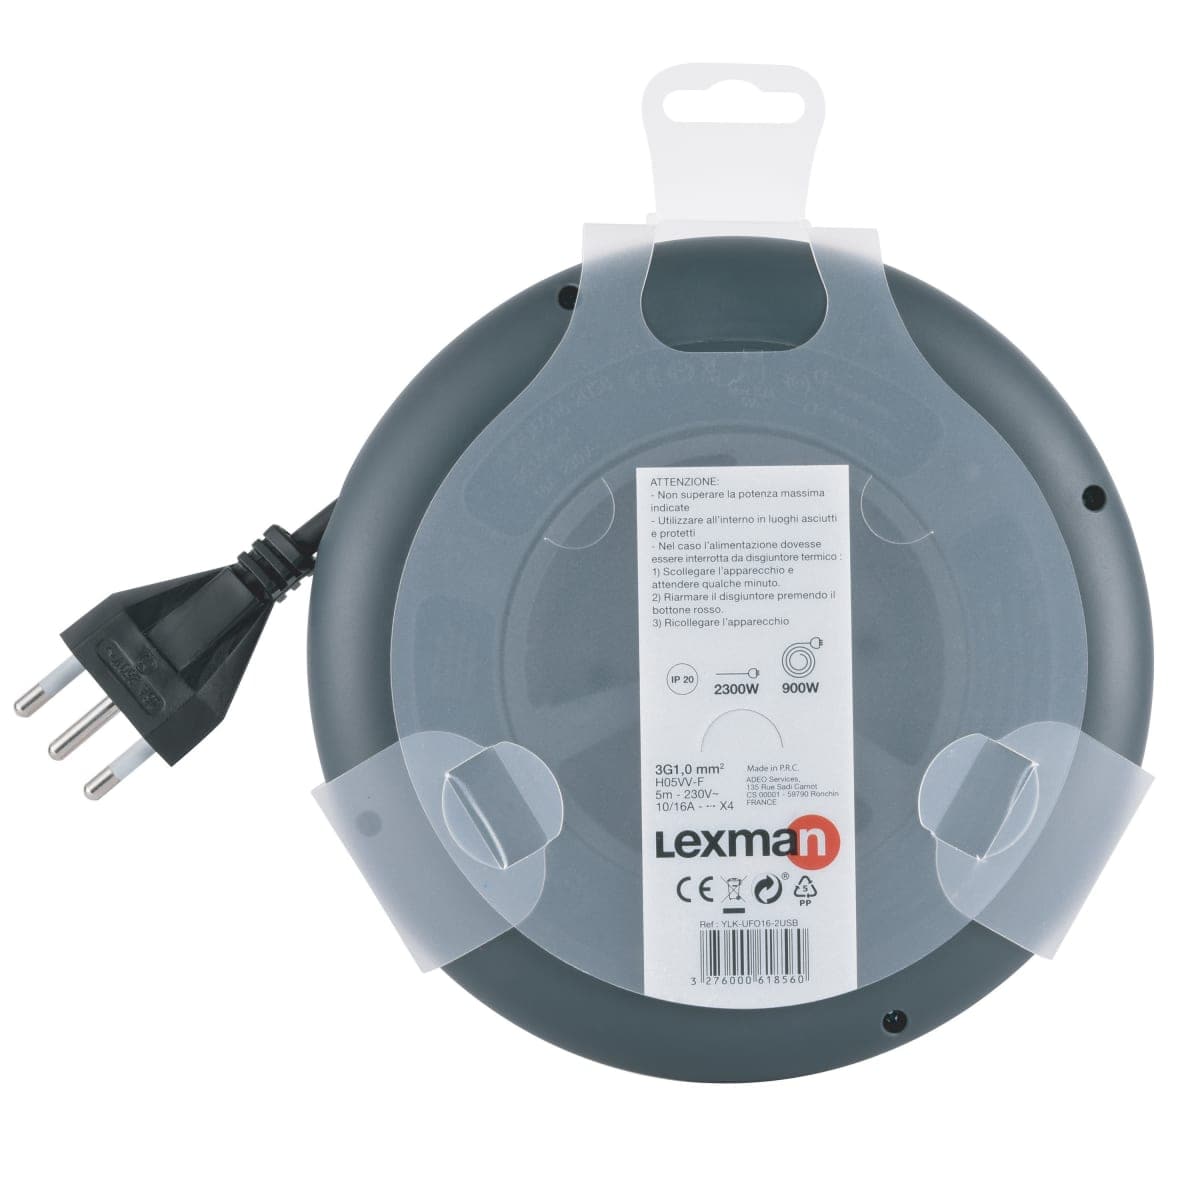 FLAT CABLE REEL 5MT 16A PLUG 4 SOCKETS 10/16A+2 USB WITH LEXMAN THERMAL CIRCUIT BREAKER - best price from Maltashopper.com BR420003053